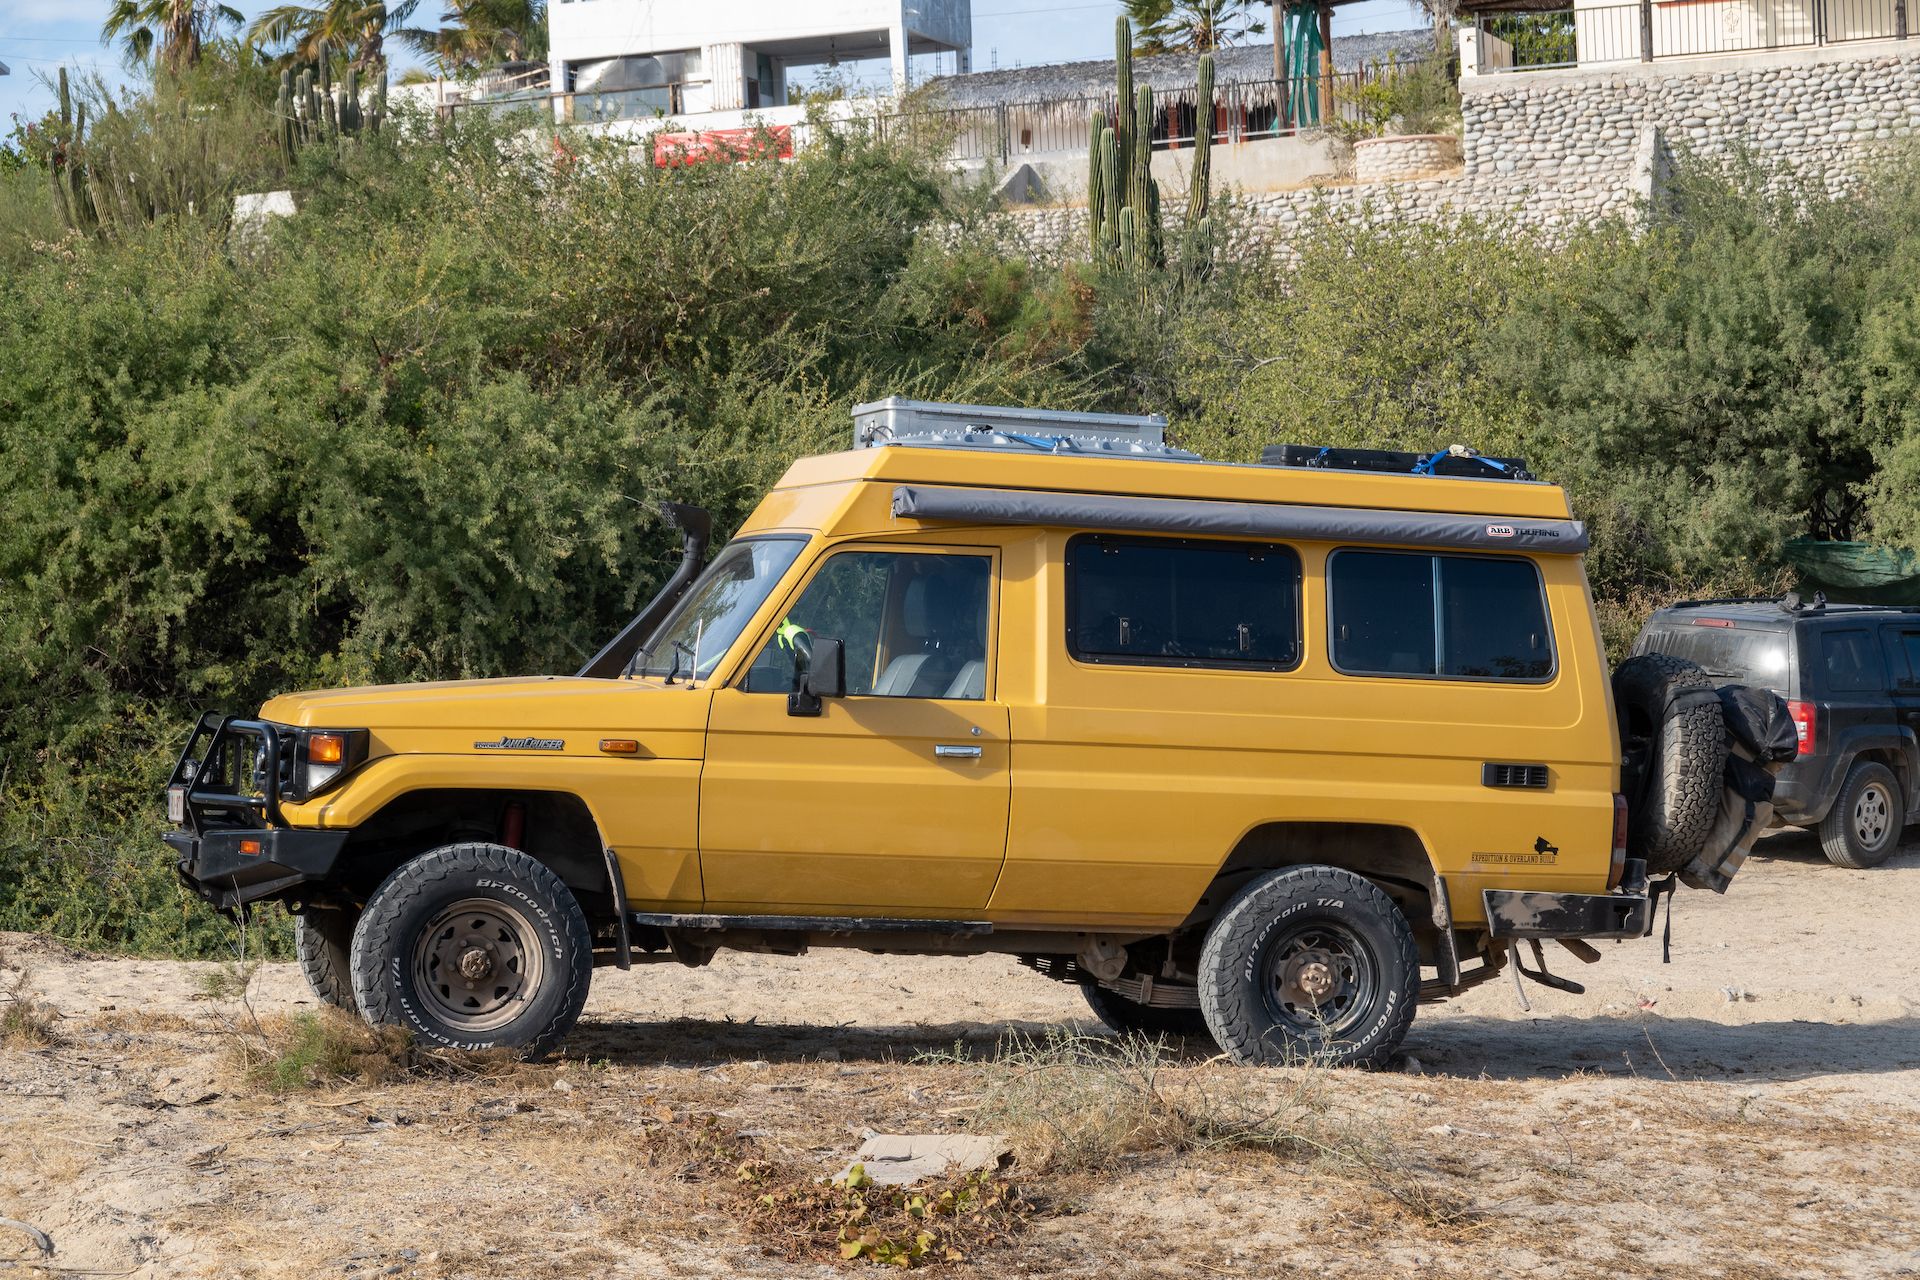 A beautiful yellow Troopy from Belgium in La Ventana